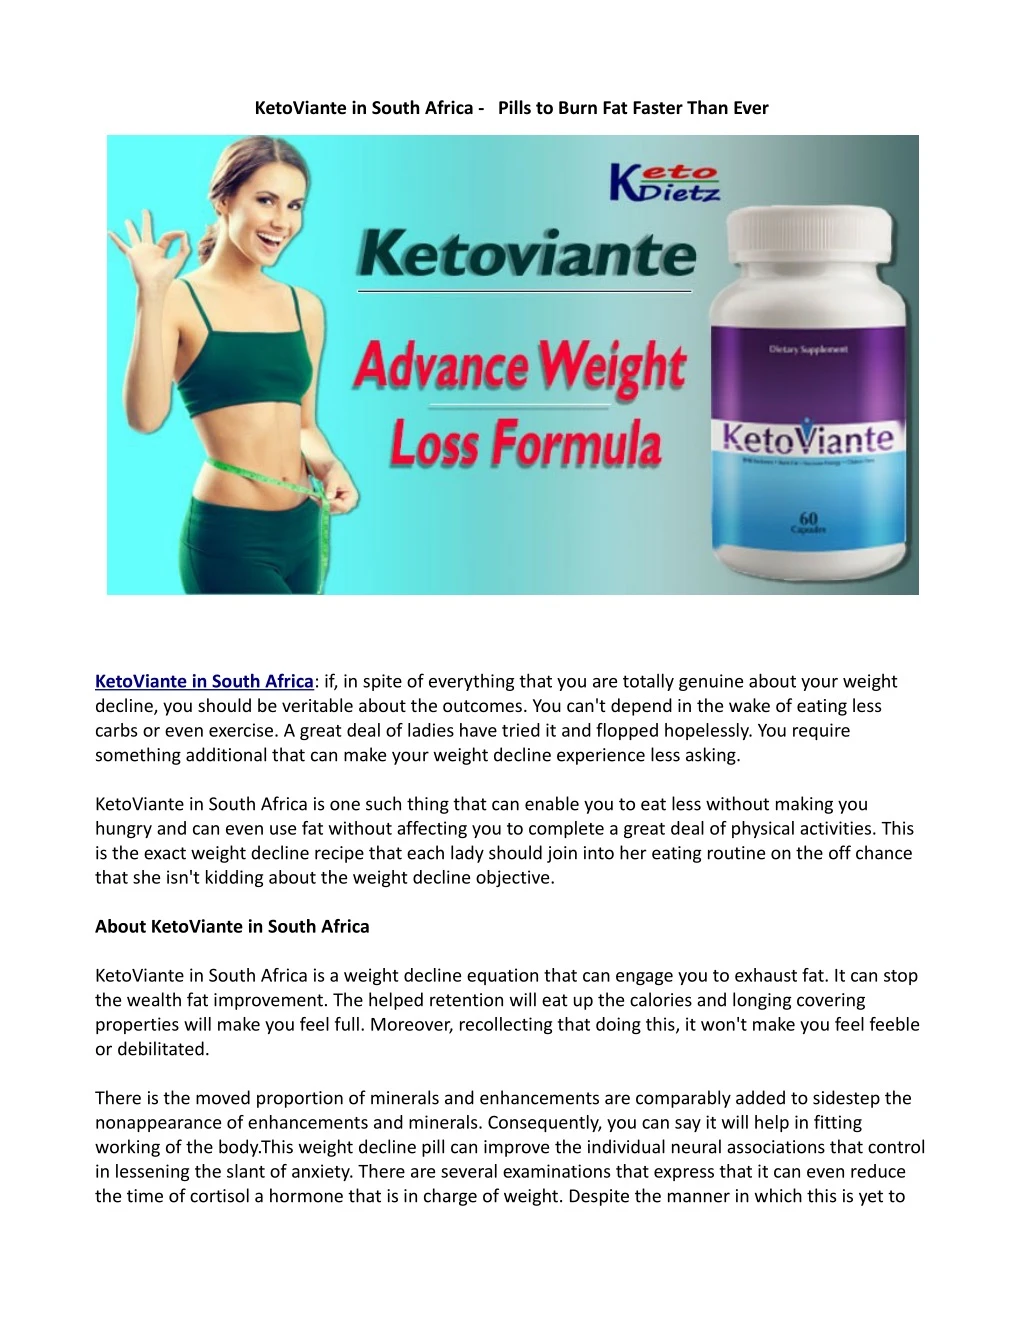 ketoviante in south africa pills to burn